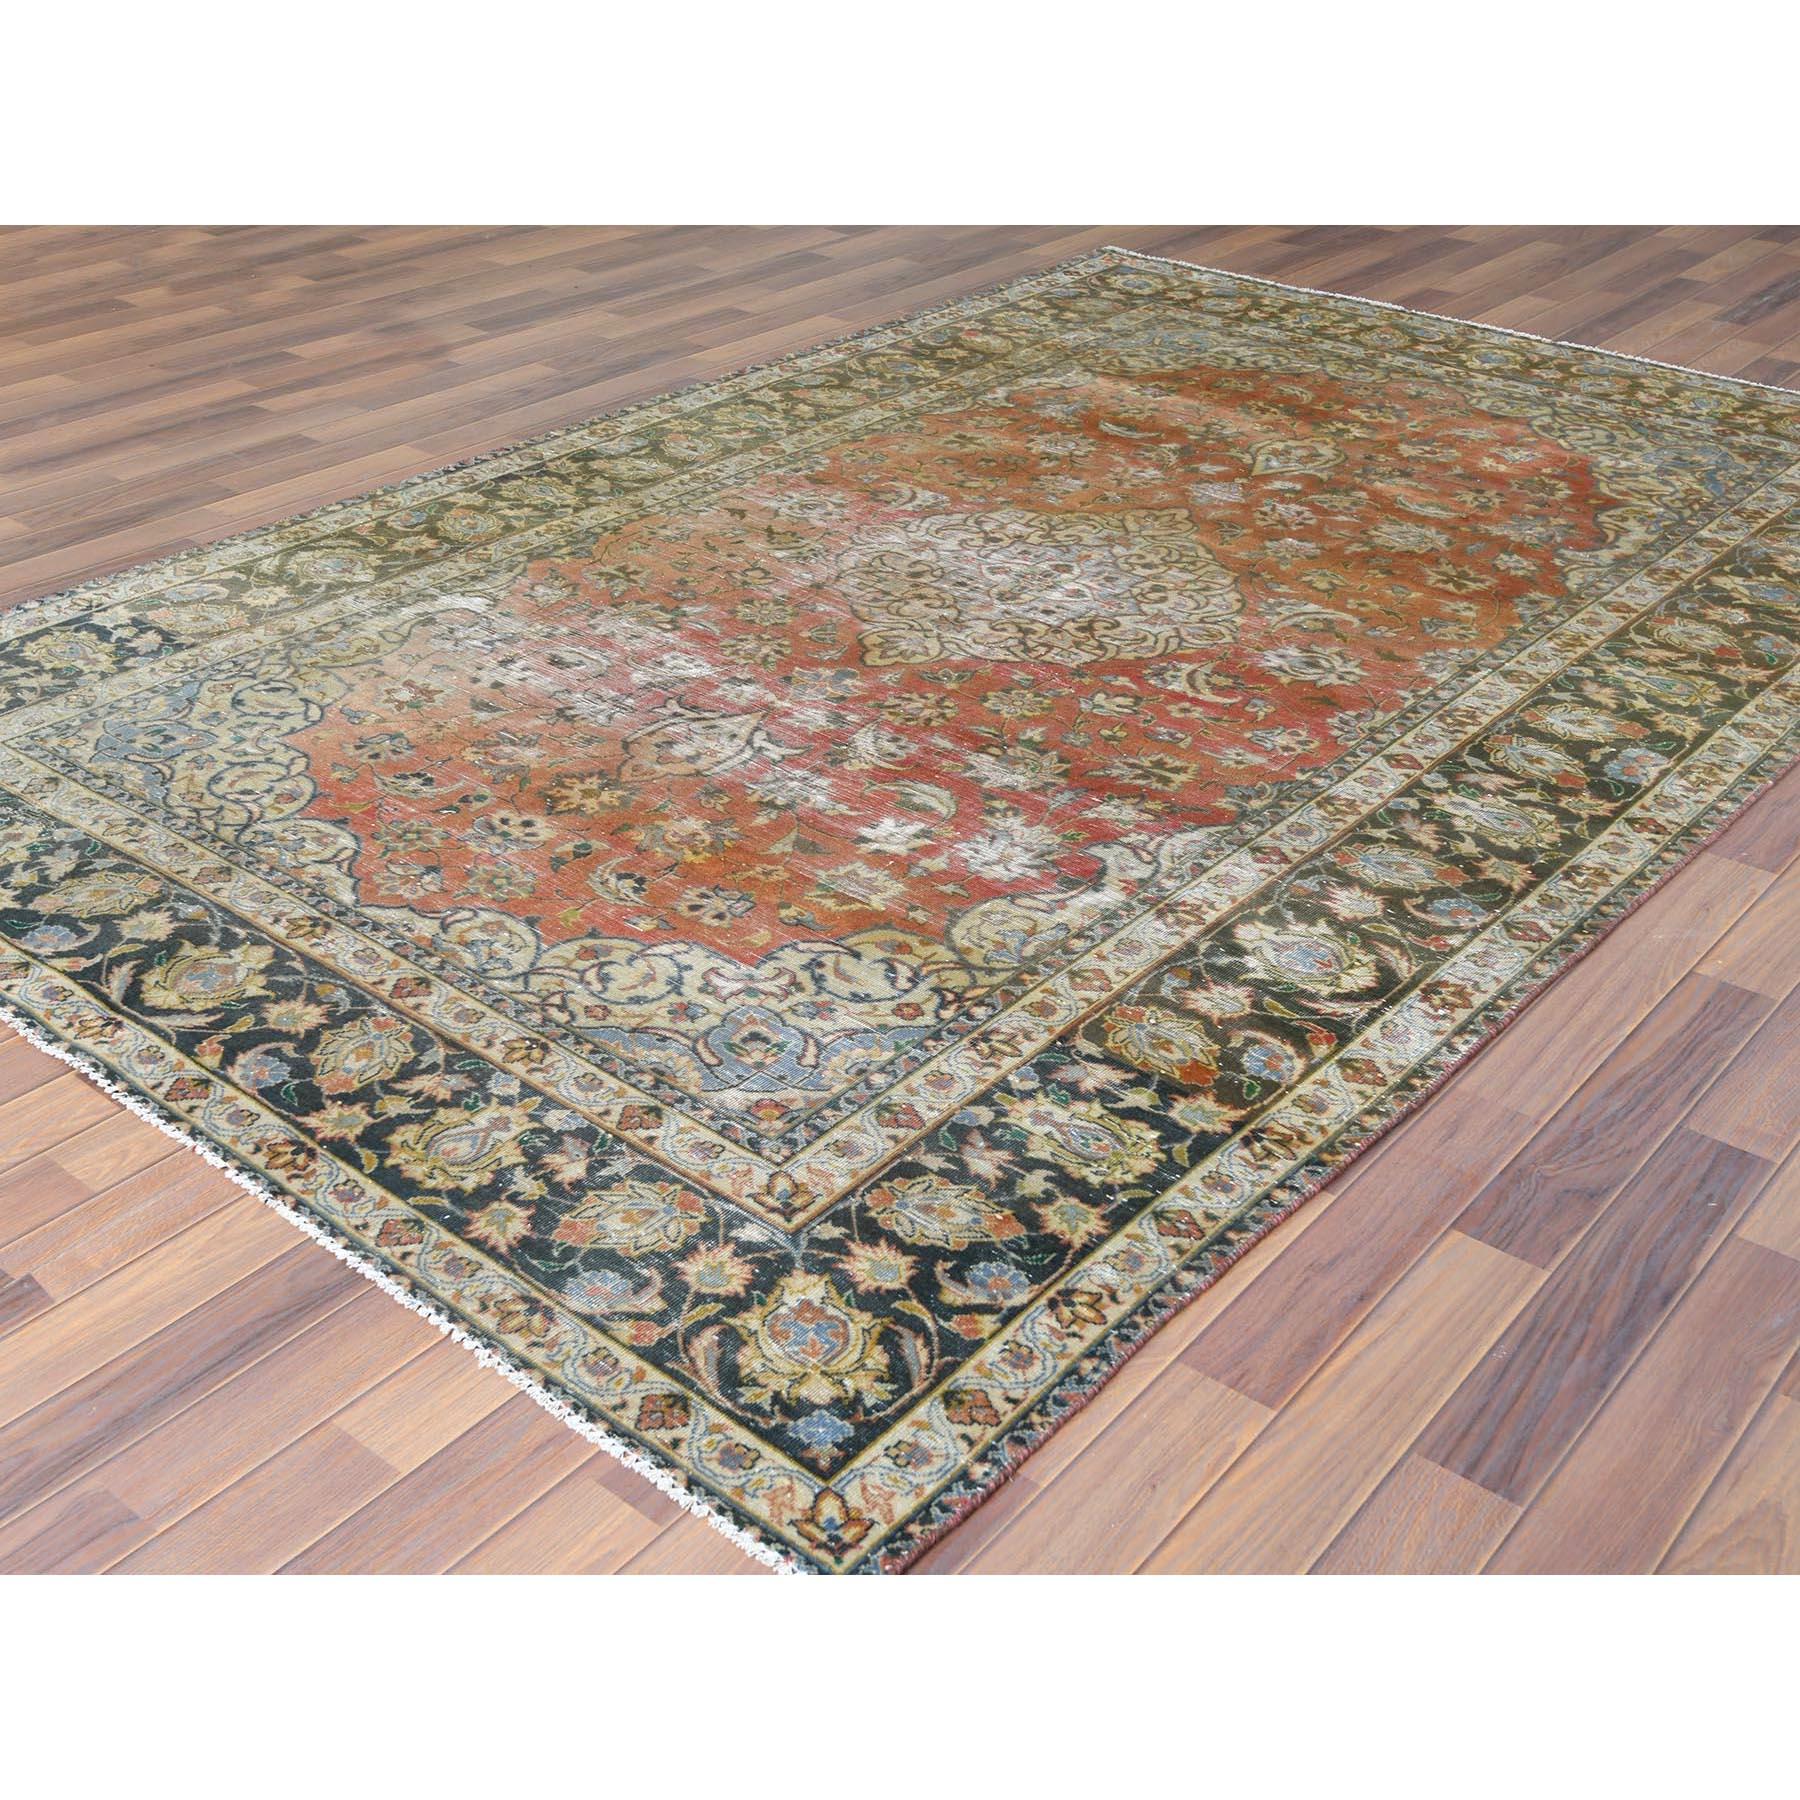 Apricot Color, Worn Wool Hand Knotted Vintage Persian Kashan Distressed Look Rug In Good Condition For Sale In Carlstadt, NJ